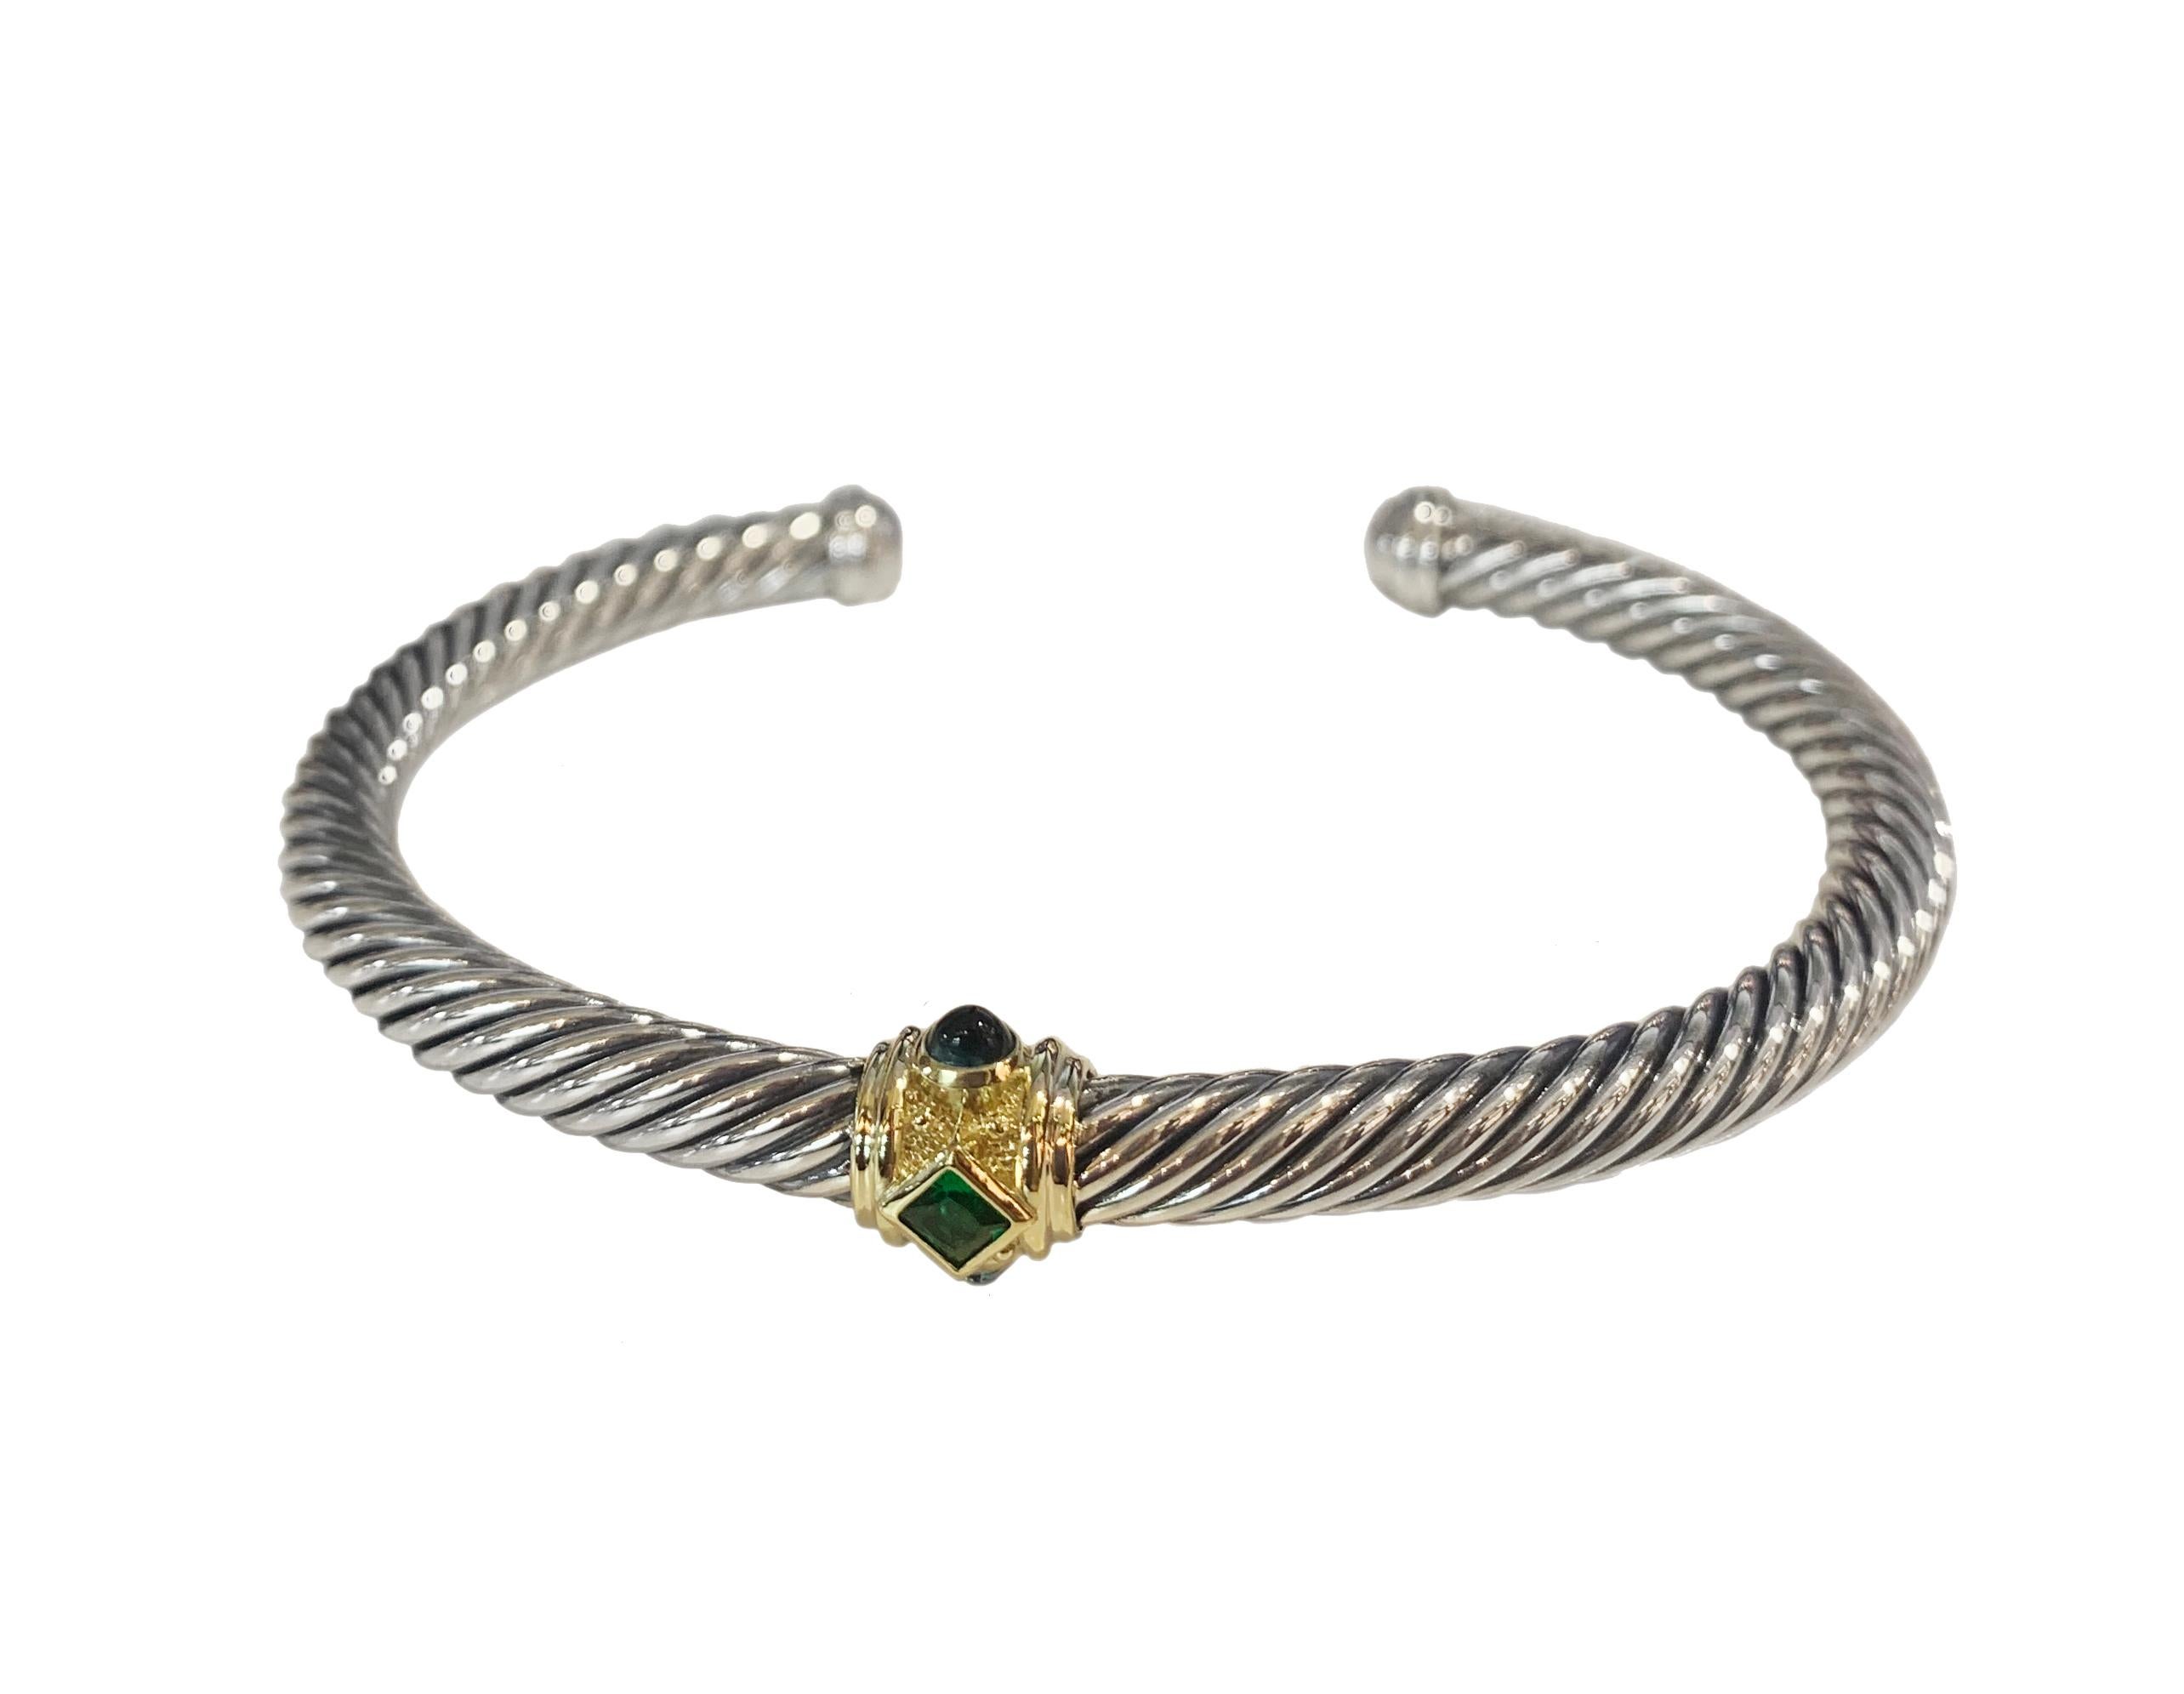 Sterling Silver and 14-karat Yellow Gold 
Size: Medium
Faceted Chrome Diopside, Hampton Blue Topaz
Cable, 5mm
Come with David Yurman pouch 
Retail: $750 